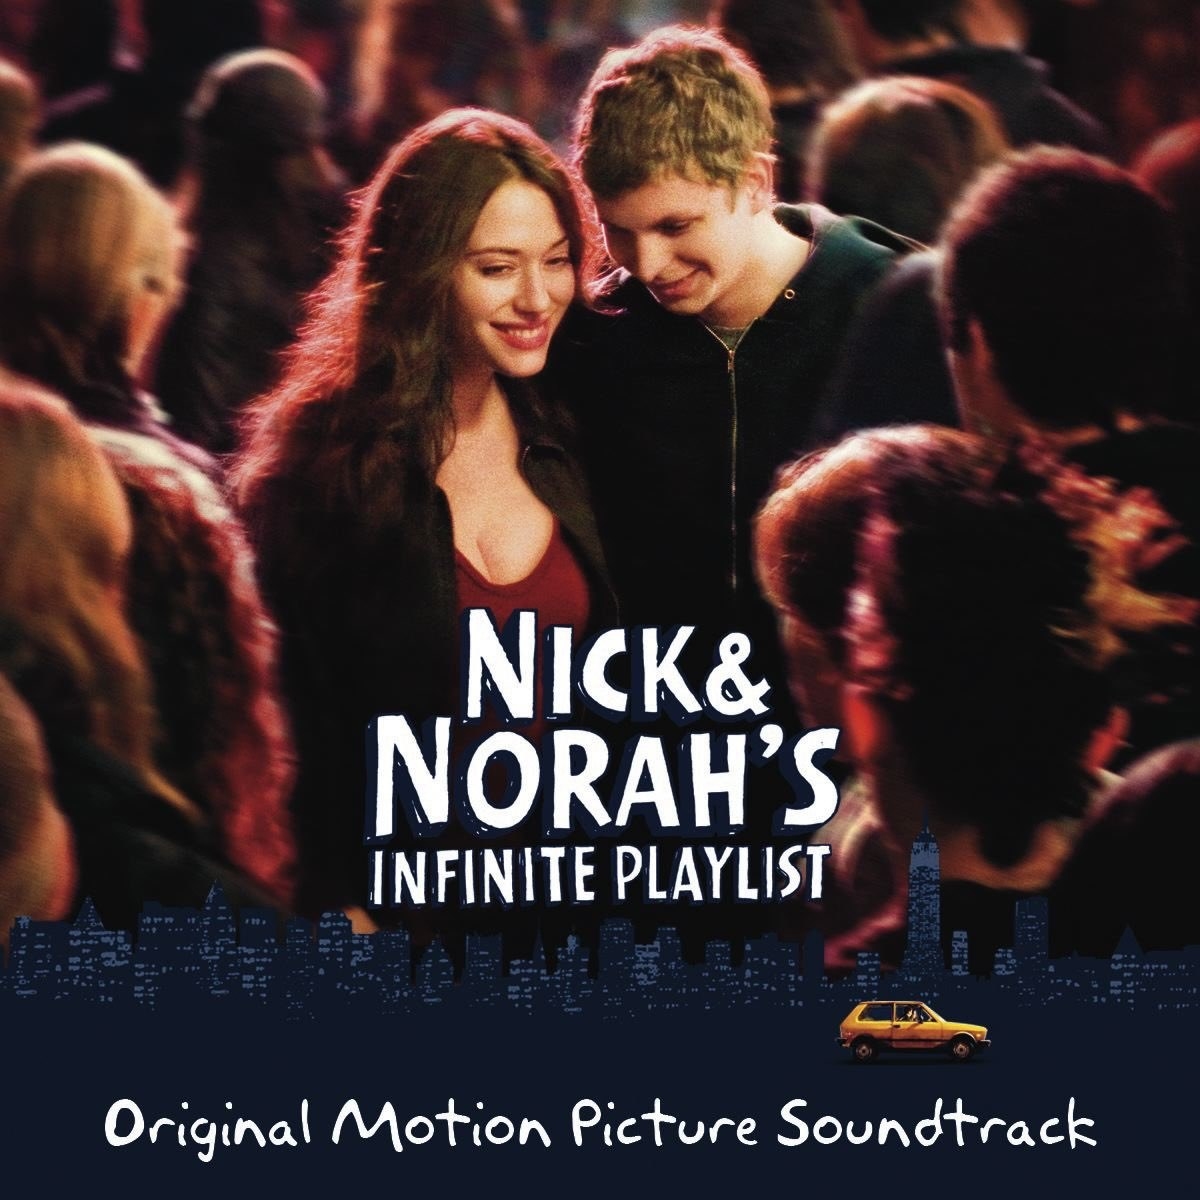 The album cover for Nick &amp; Norah&#x27;s Infinite Playlist